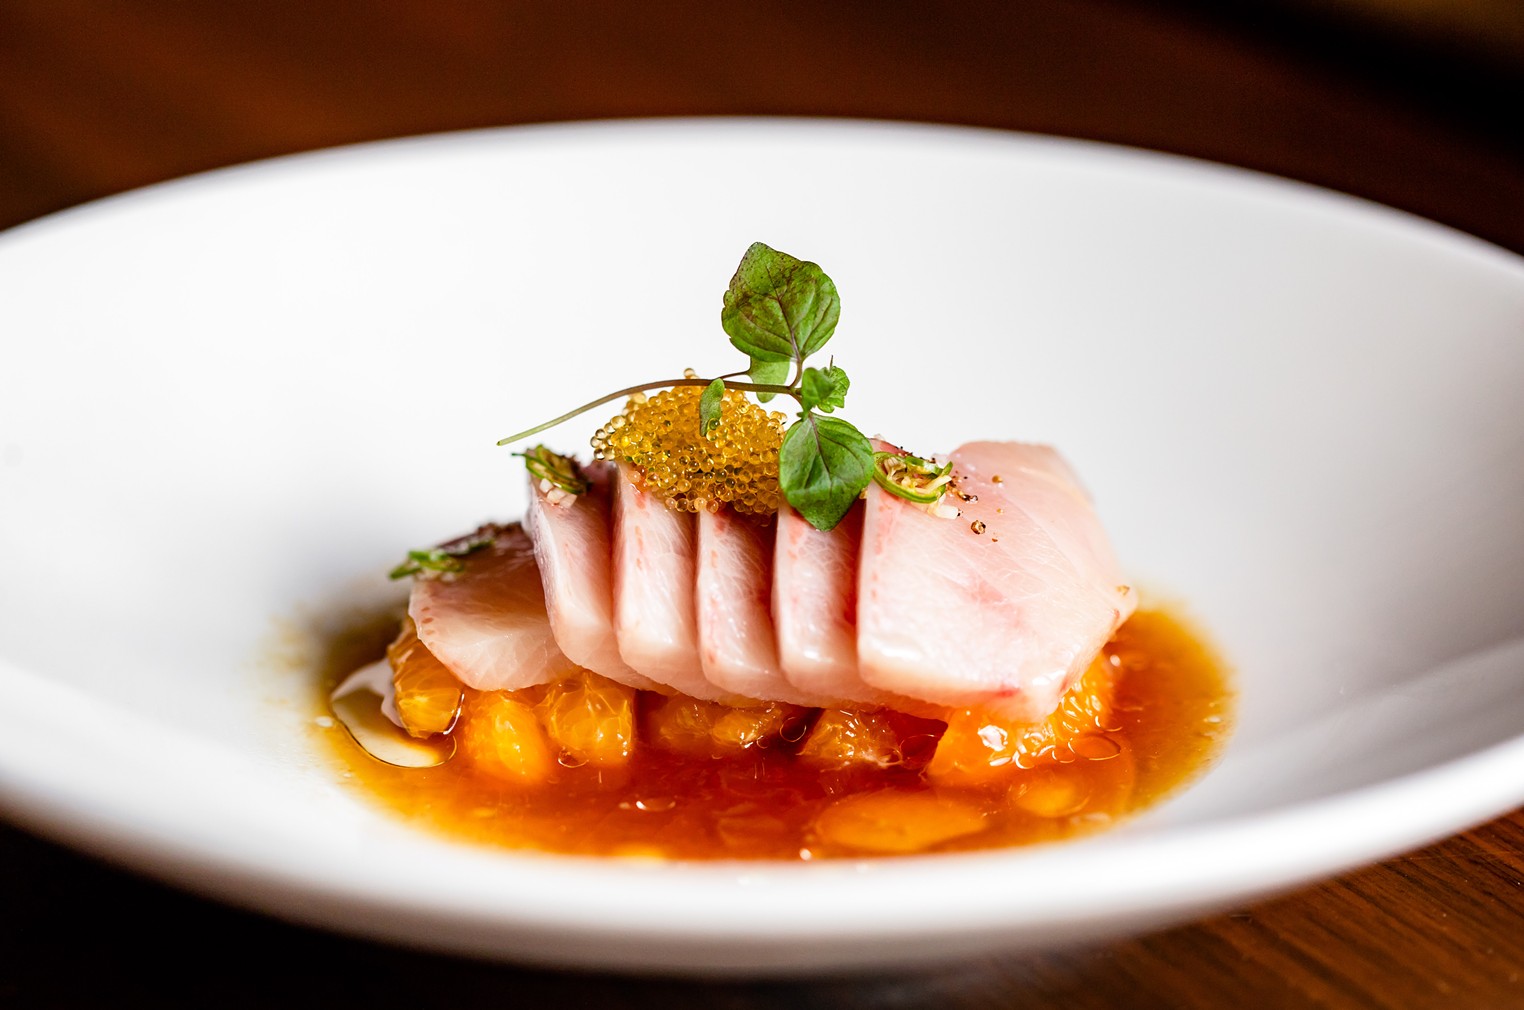 Uchi Scottsdale opens Feb. 1. What to expect at the sushi restaurant